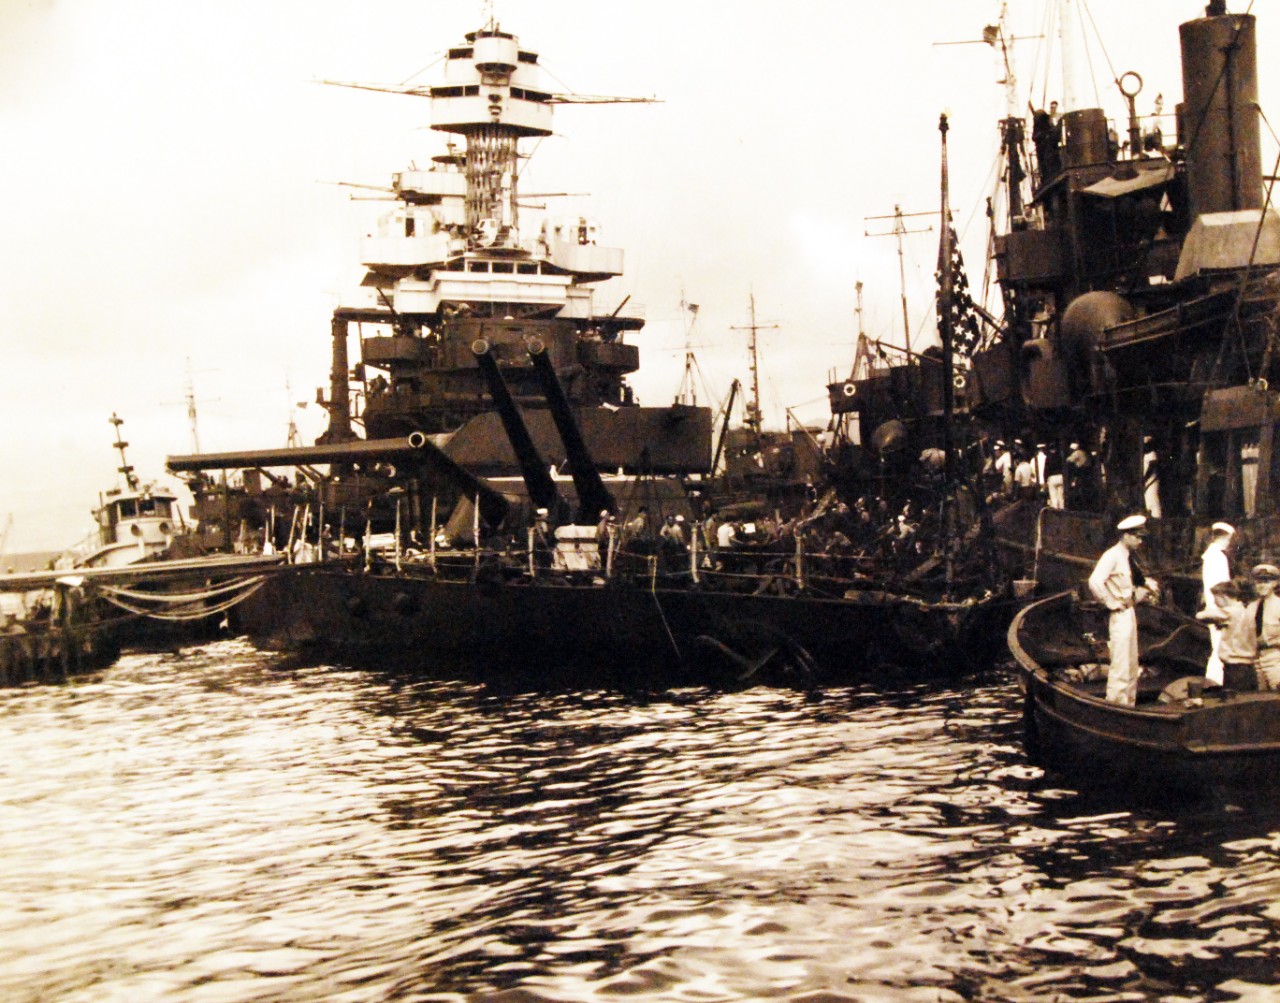 80-G-32454: Japanese Attack on Pearl Harbor, December 7, 1941.   Bow view of the damaged battleship USS California (BB 44).  Official U.S. Navy photograph, now in the collections of the National Archives. (9/15/15).